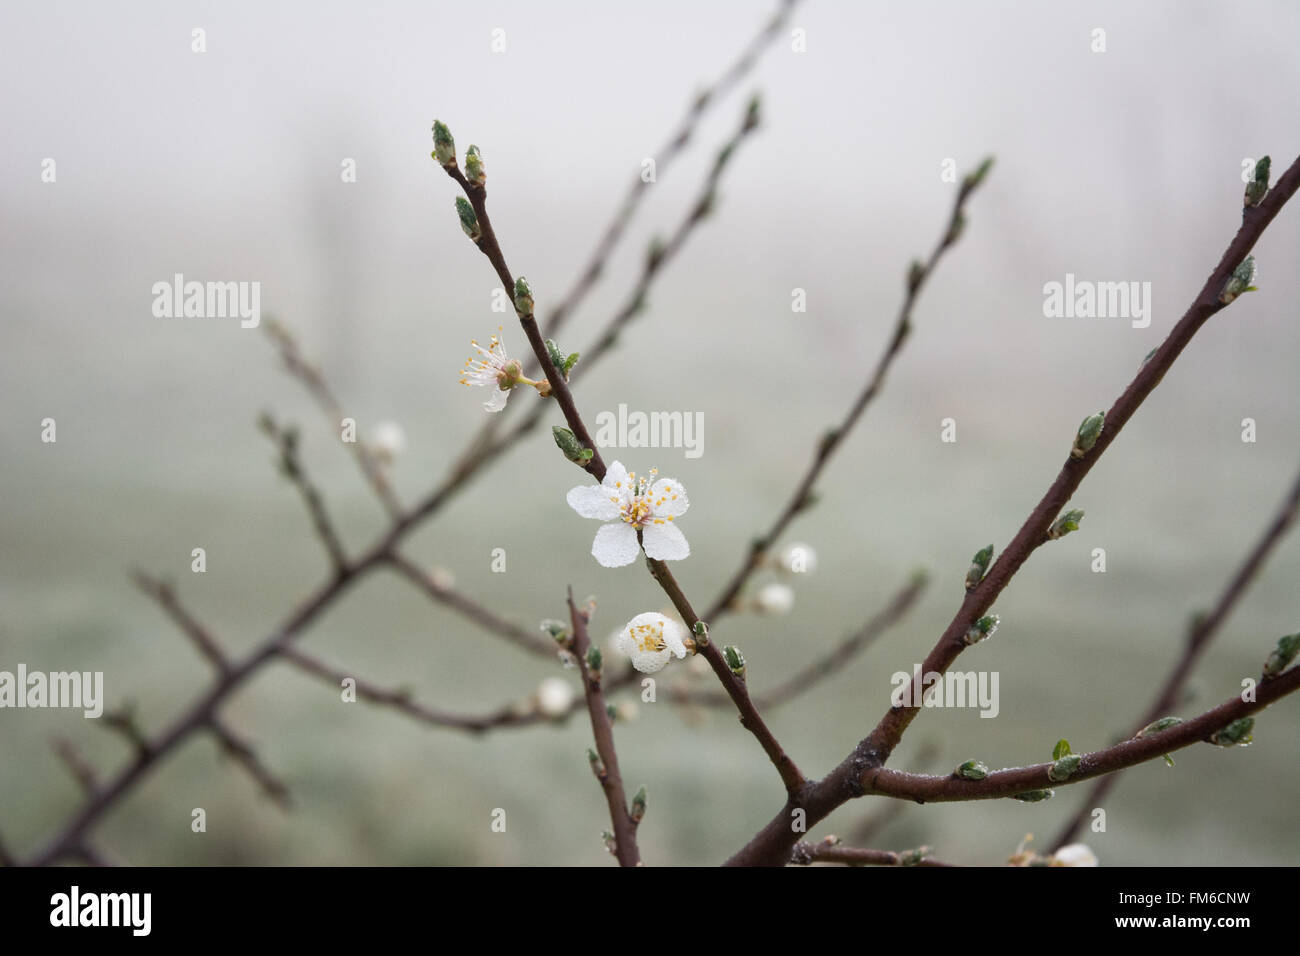 A blackthorn bush flowers on a dense foggy morning  Credit: Patricia Phillips/Alamy Live News Stock Photo